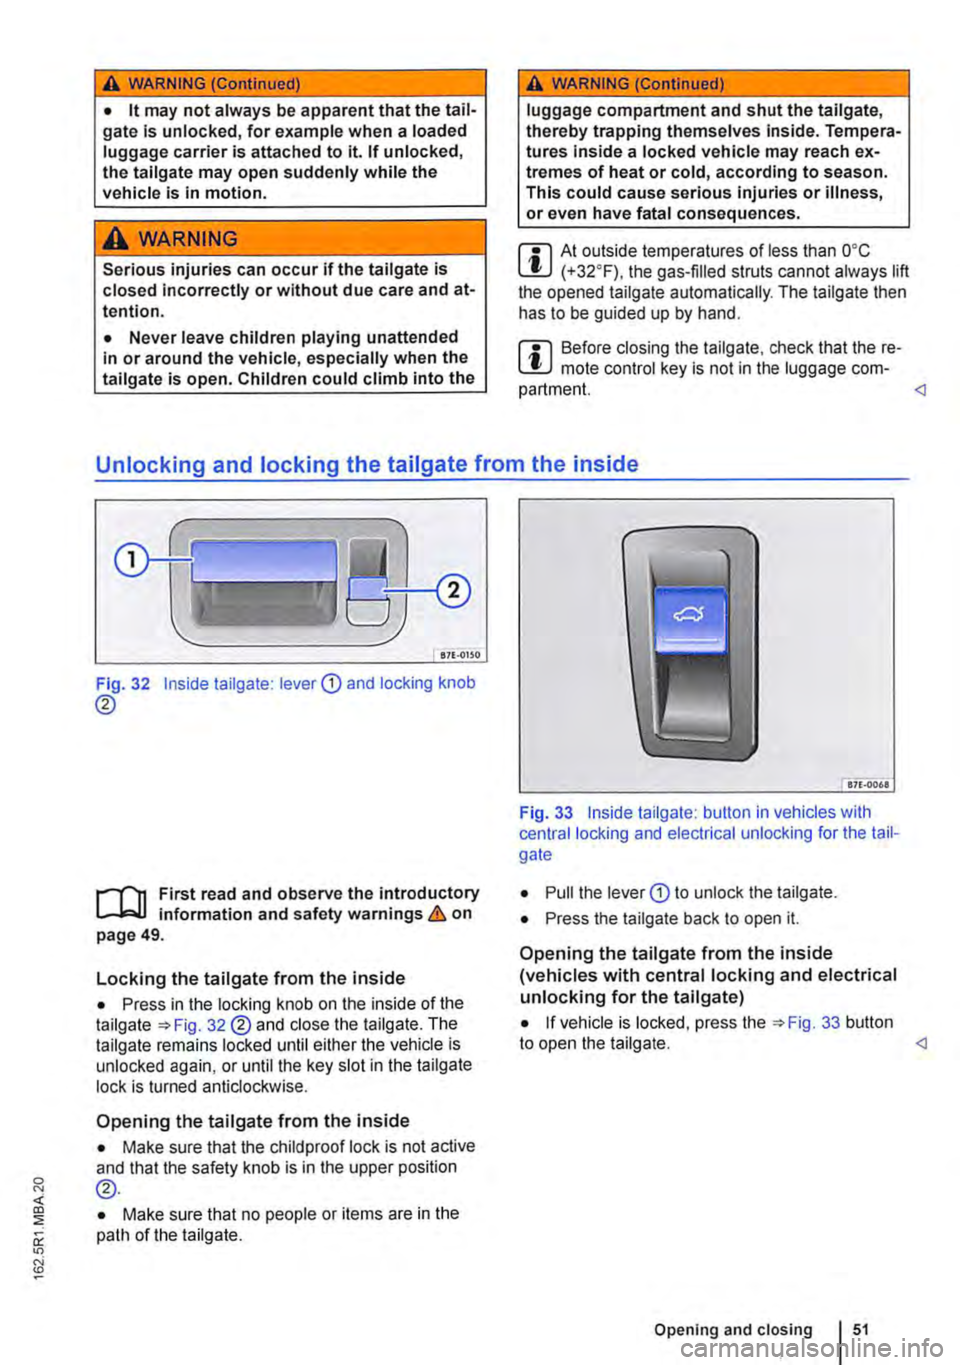 VOLKSWAGEN TRANSPORTER 2013  Owners Manual A WARNING (Continued) 
• lt may not always be apparent that the tail-gate is unlocked, for example when a loaded luggage carrier is attached to it. If unlocked, the tallgate may open suddenly while 